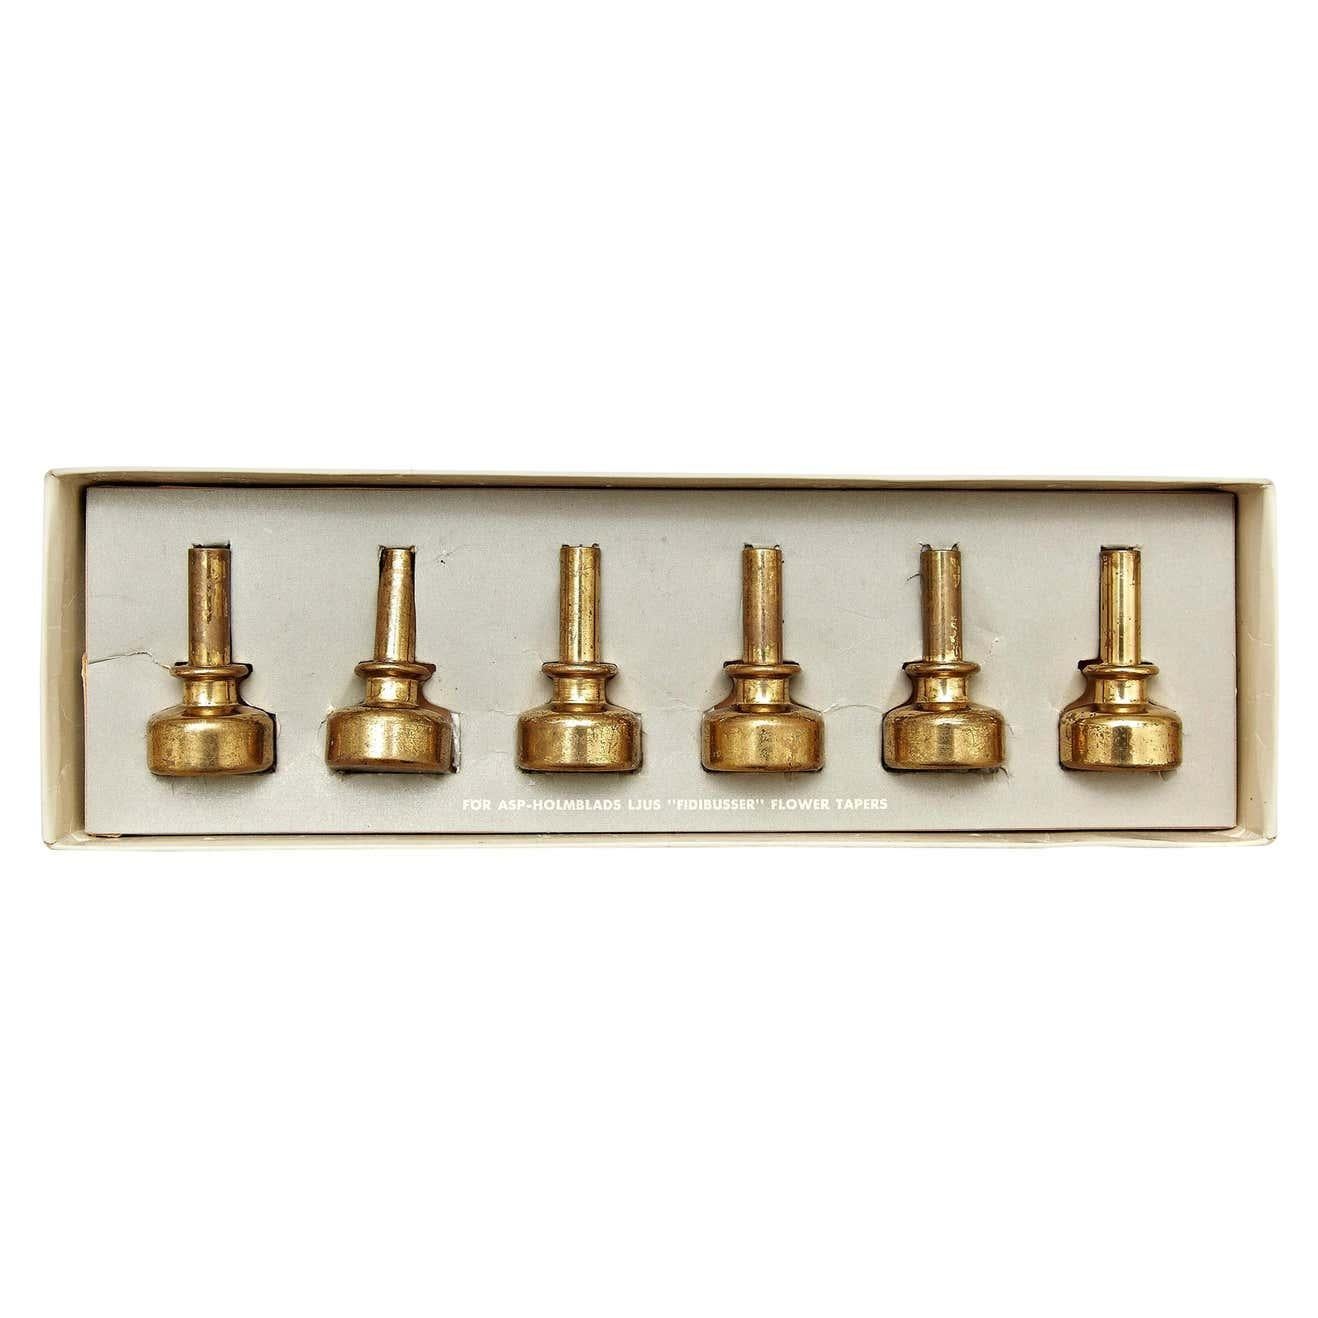 Swedish Hans-Agne Jakobsson Brass Candleholders Collection, circa 1960 For Sale